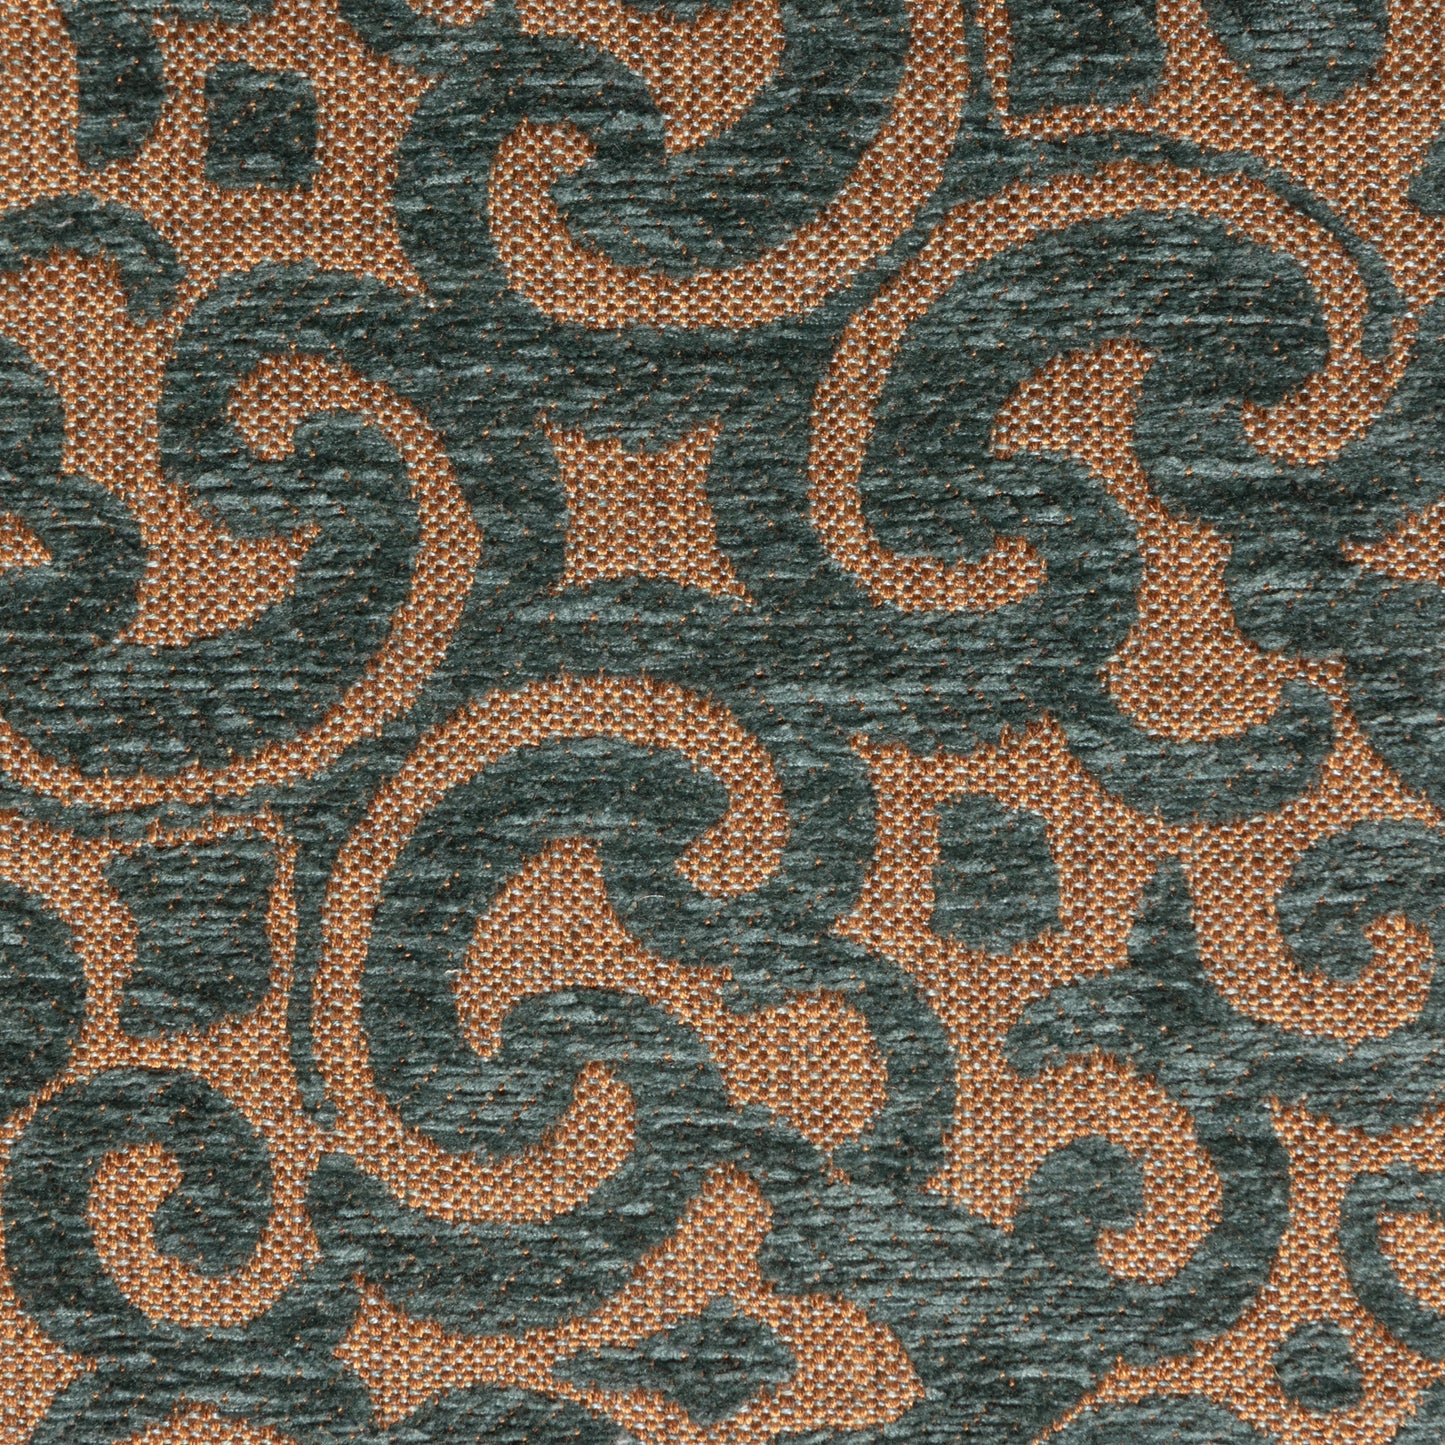 #073 GREEN AND BROWN JACQUARD